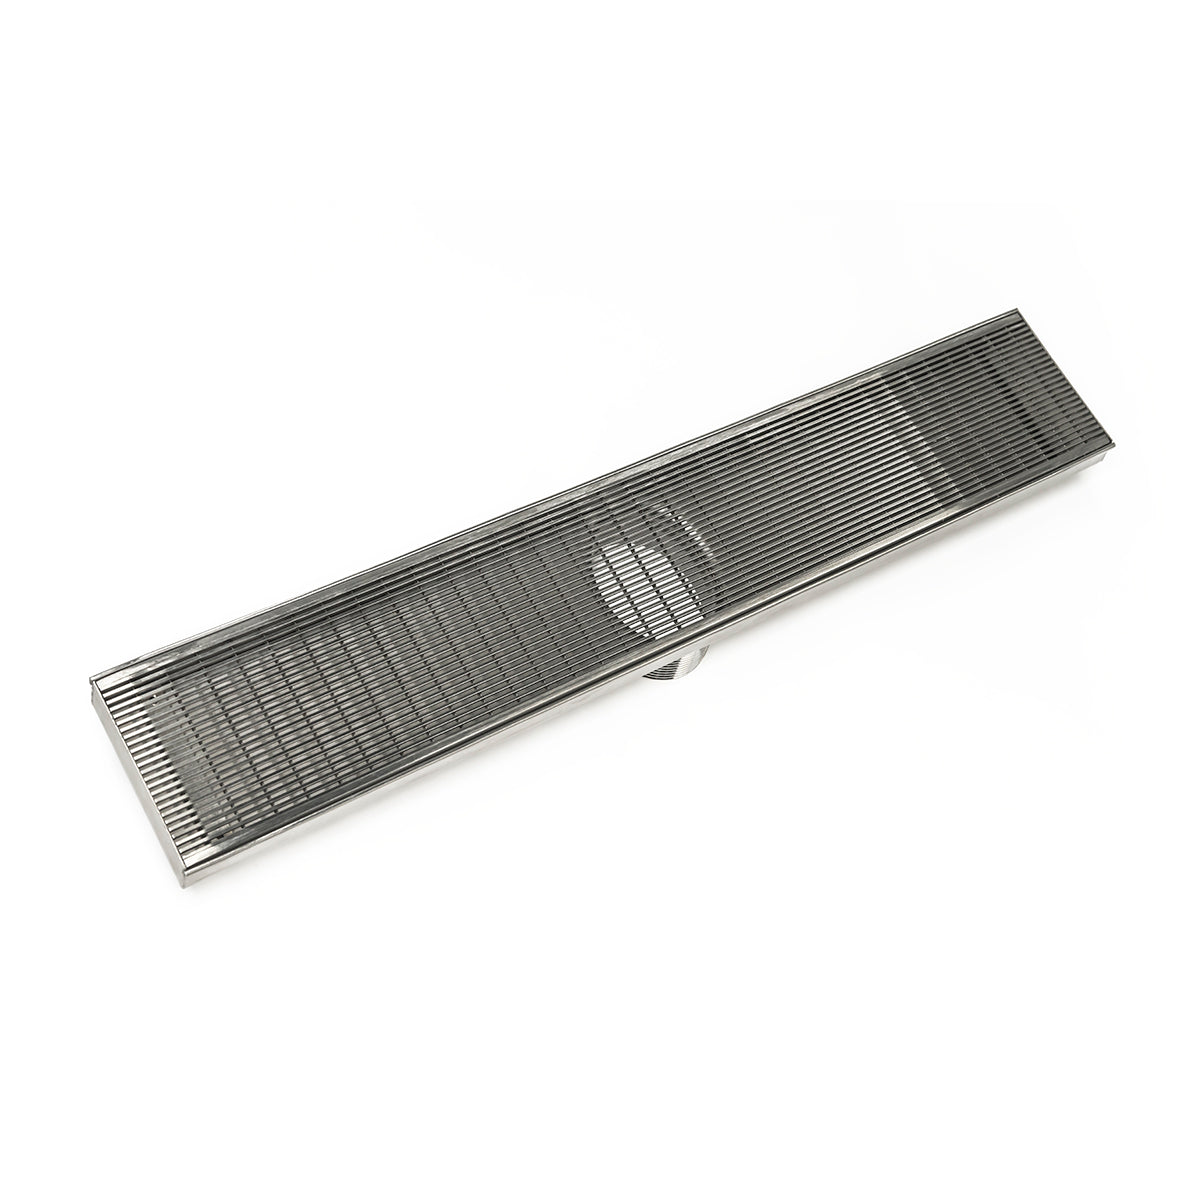 Infinity Drain 48" FX Series High Flow Fixed Length Linear Drain Kit with Wedge Wire Grate with ABS Drain Body